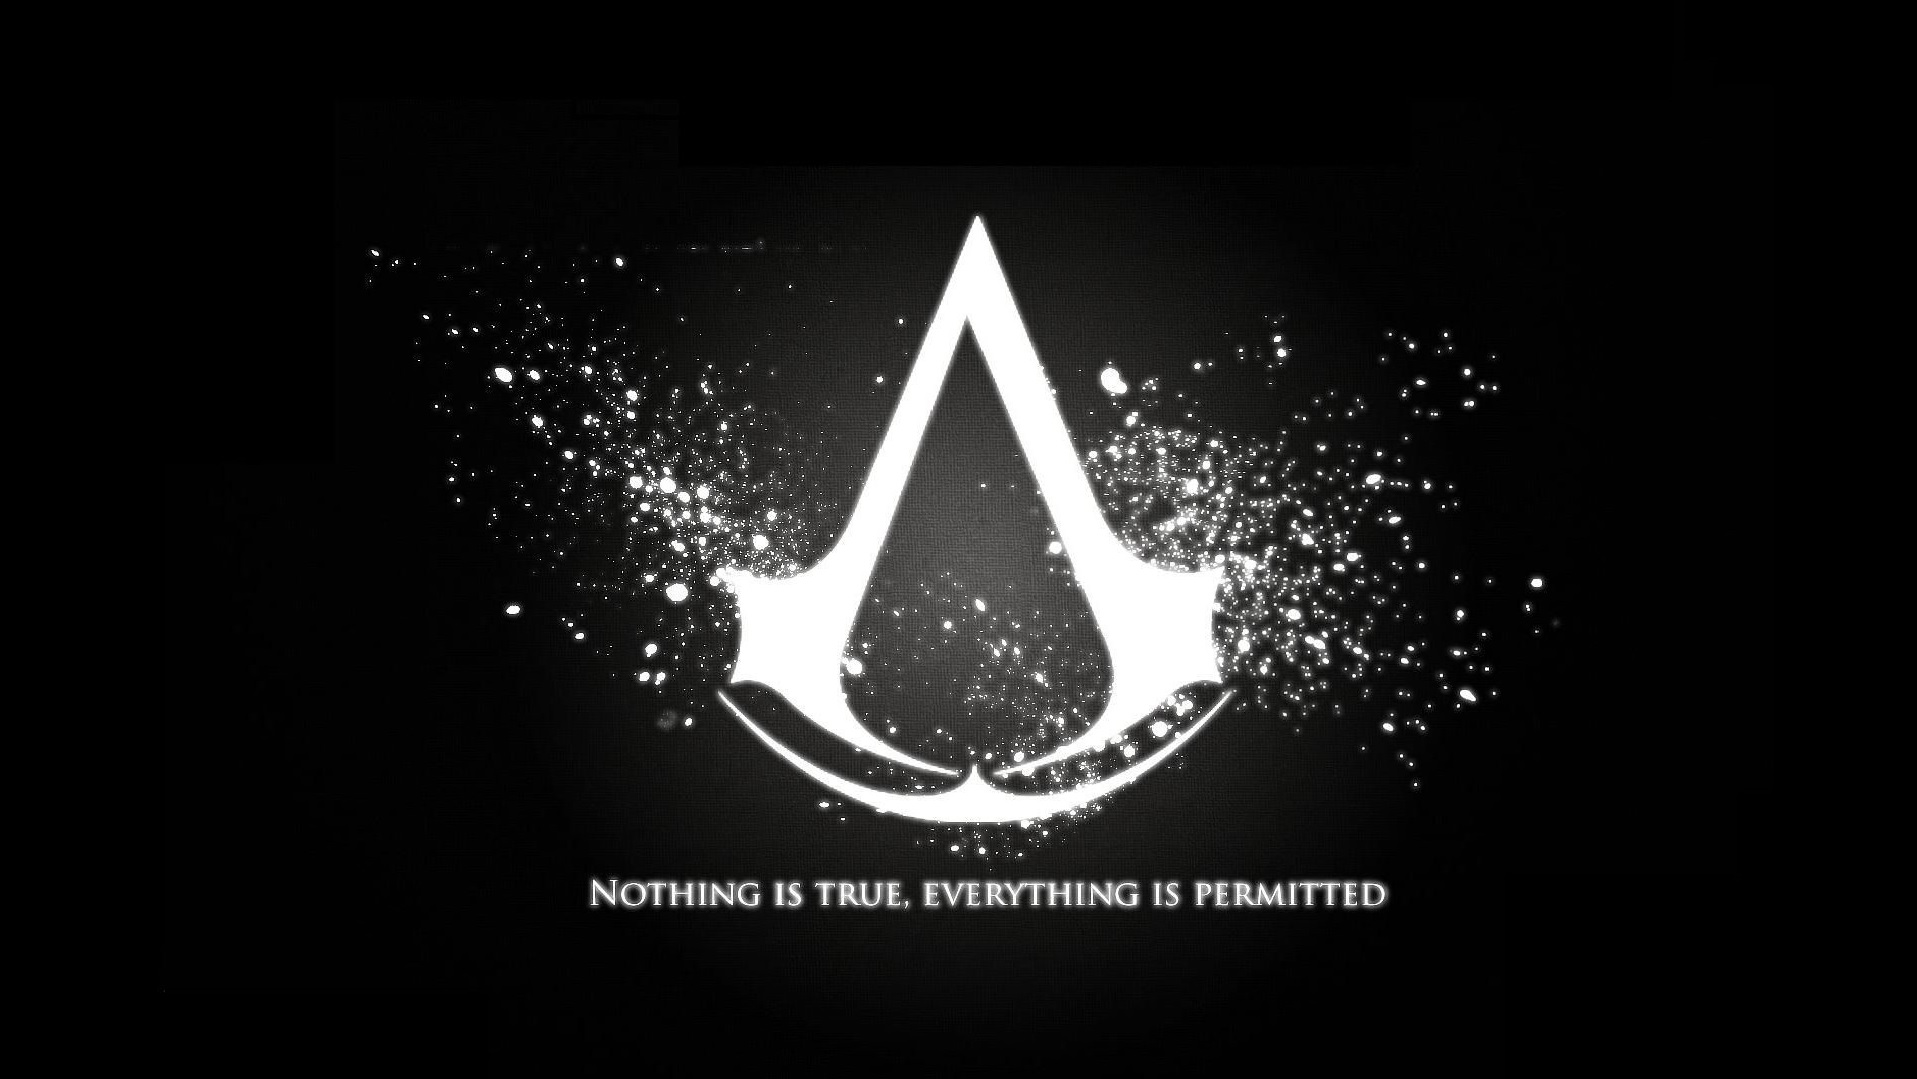 Assassin's Creed: The Ezio Collection] “nothing is true